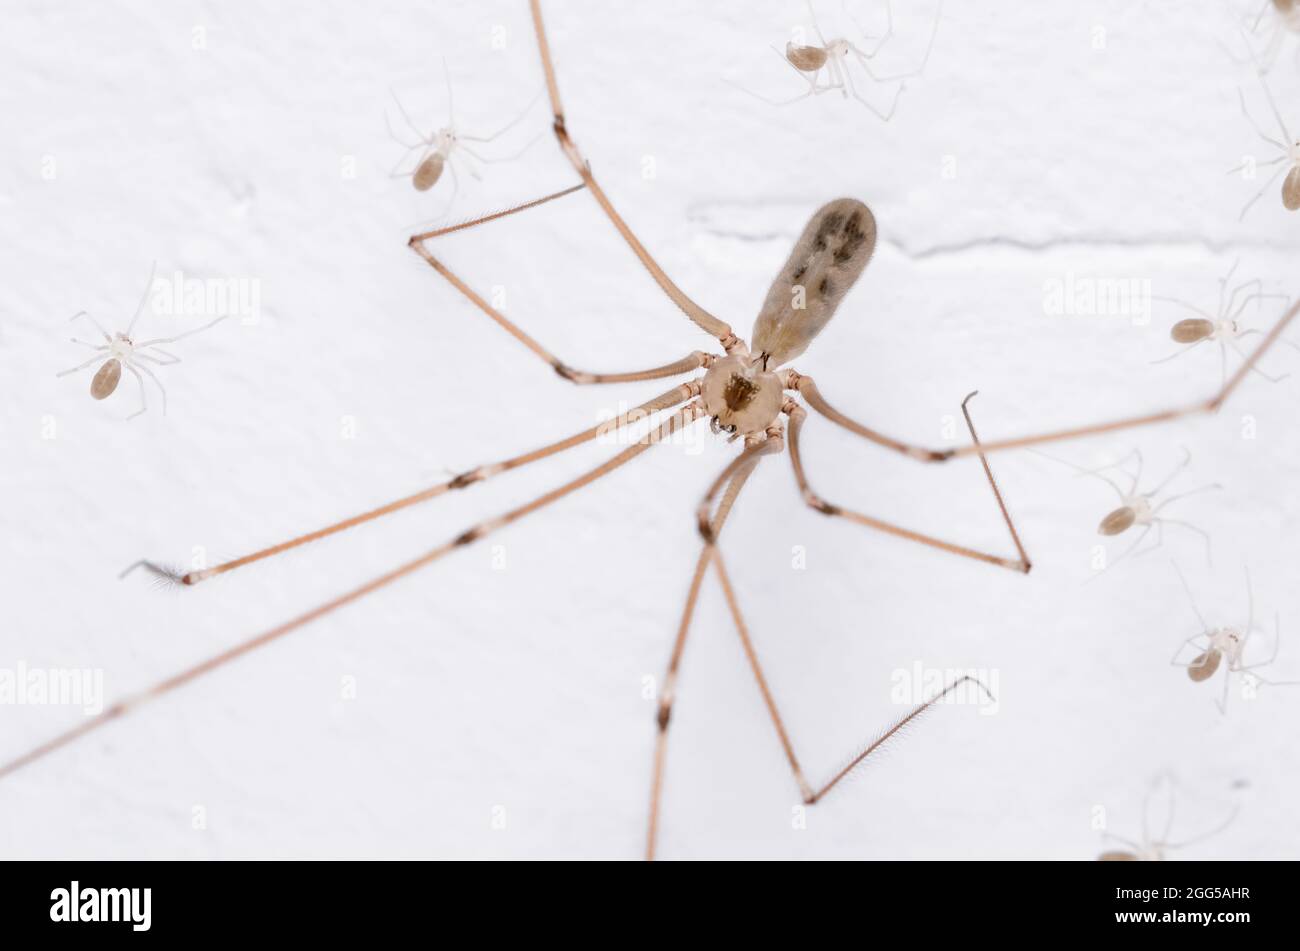 Pholcus phalangioides, macro of a female cellar spider, known as daddy longlegs spider or skull spider and her tiny young spiderlings Stock Photo